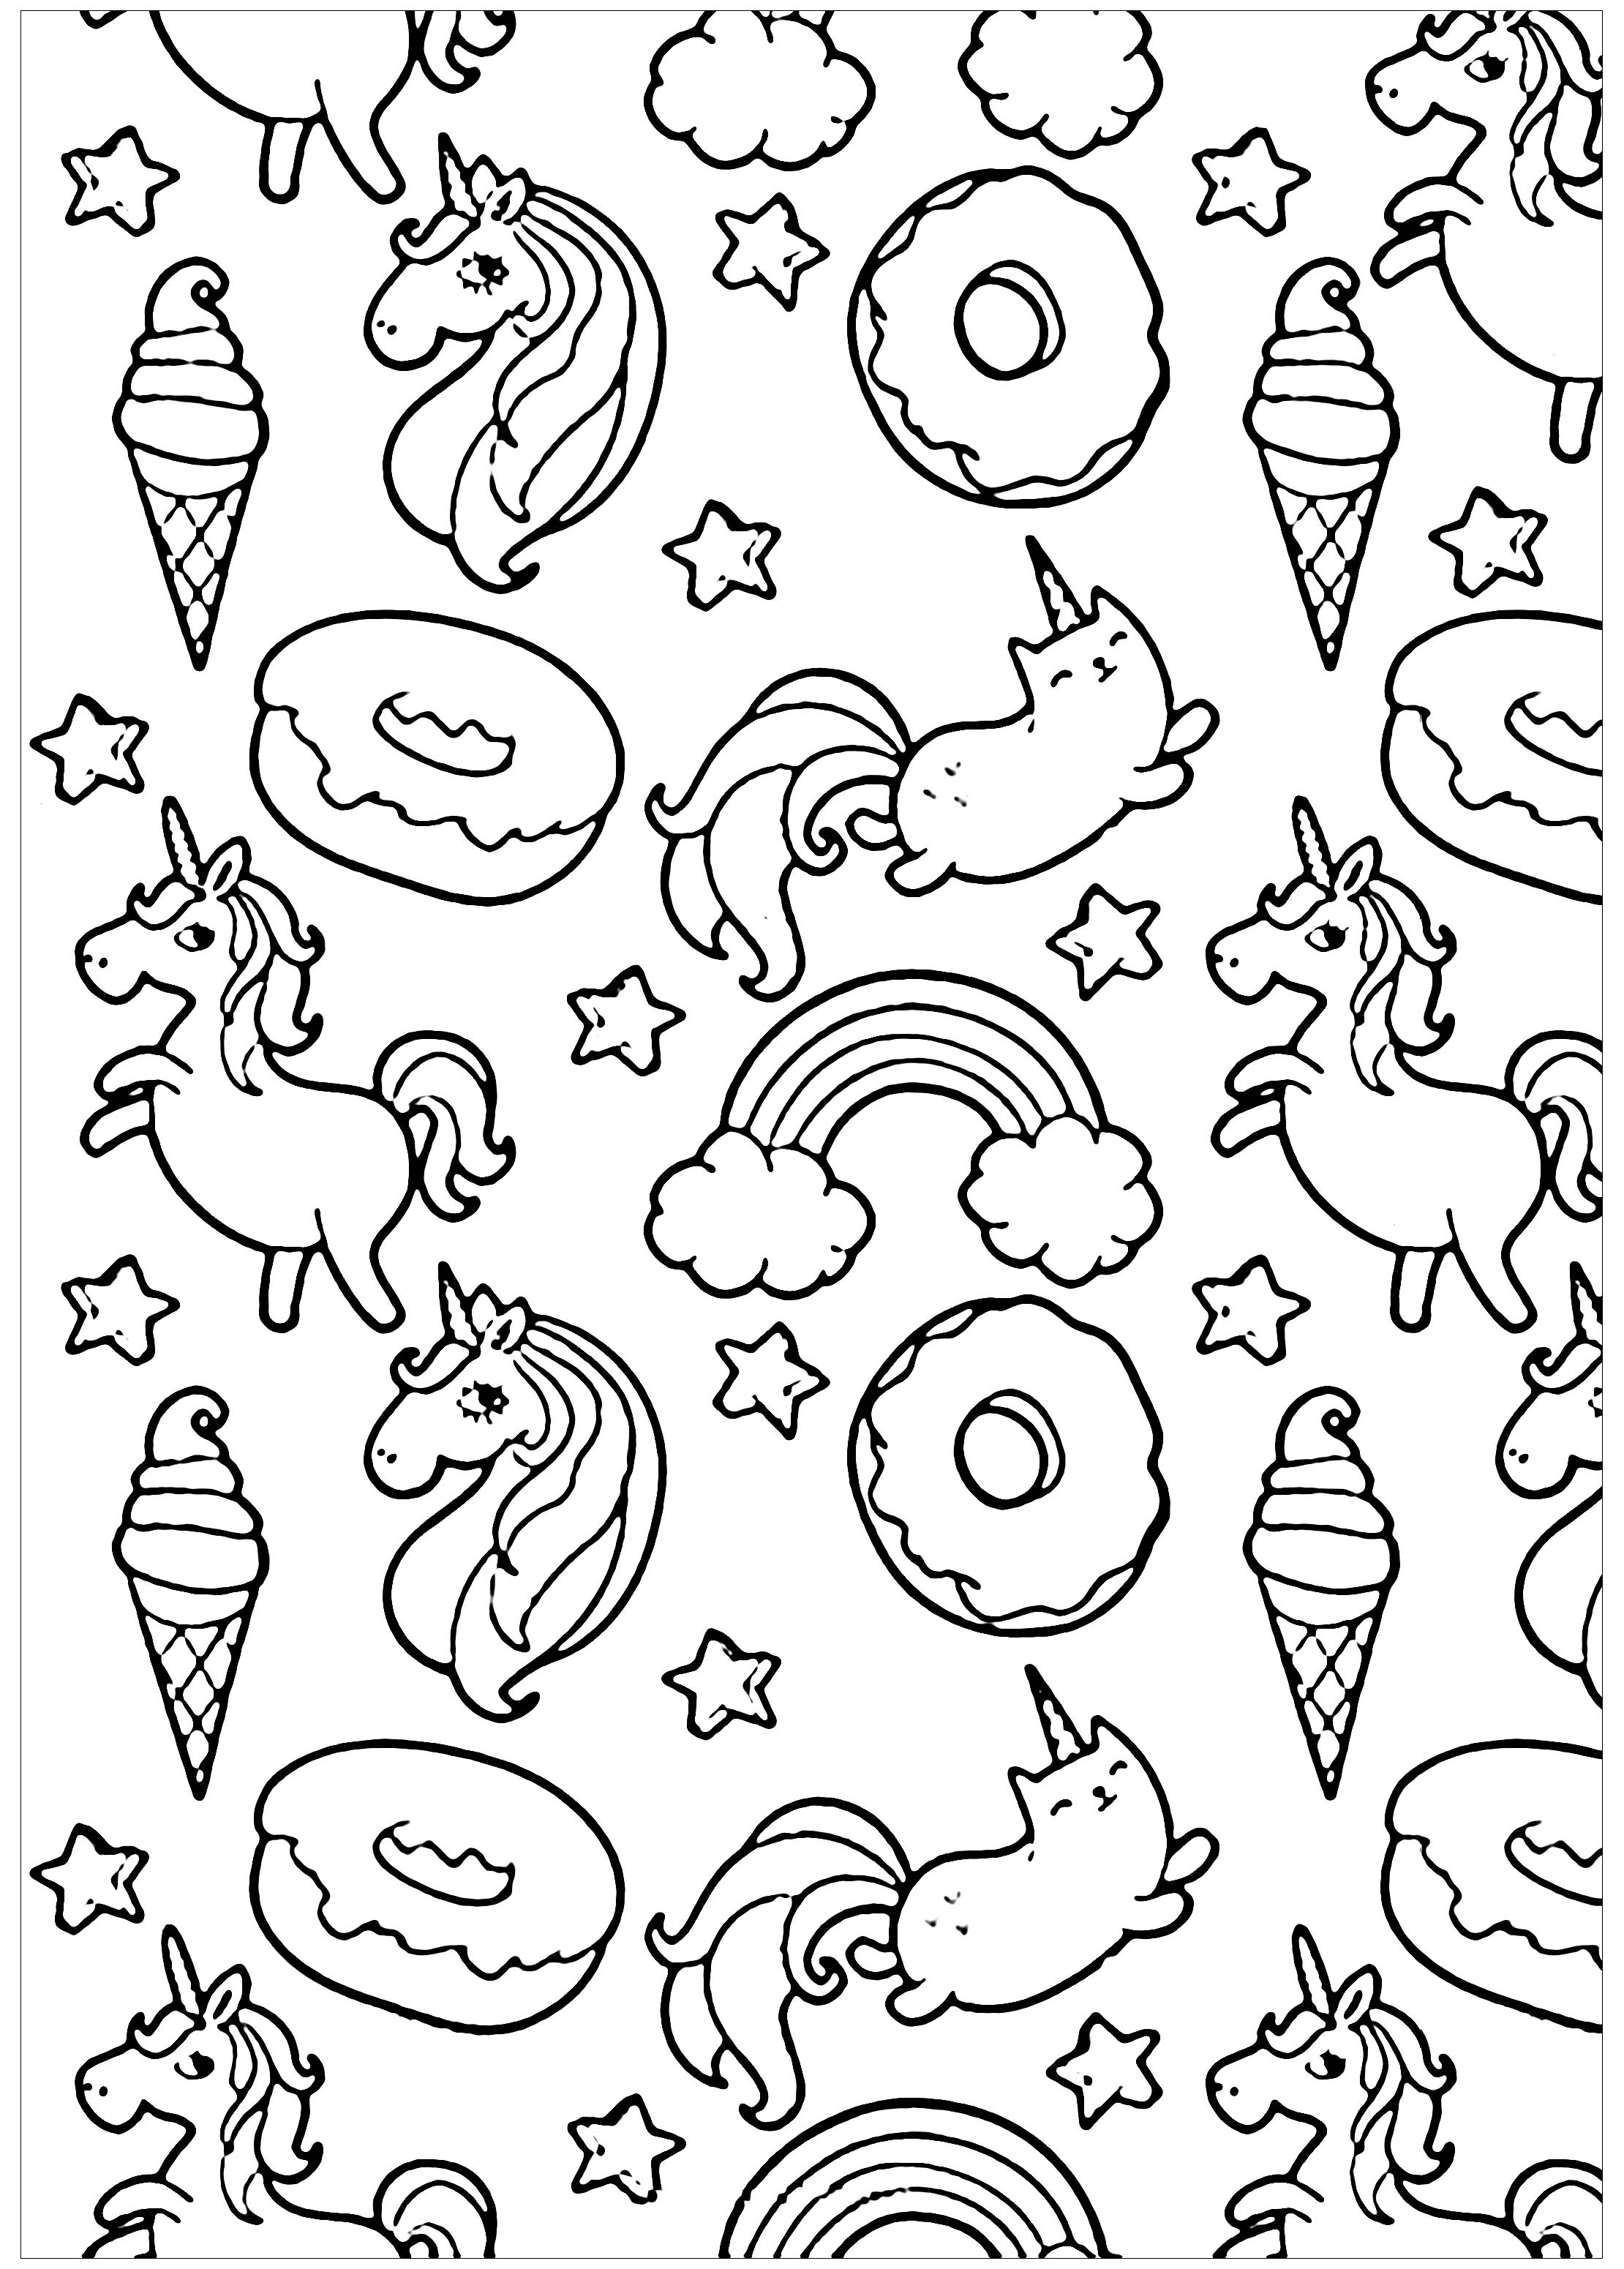 Pusheen donuts and unicorn - Doodle Art / Doodling Adult Coloring ...